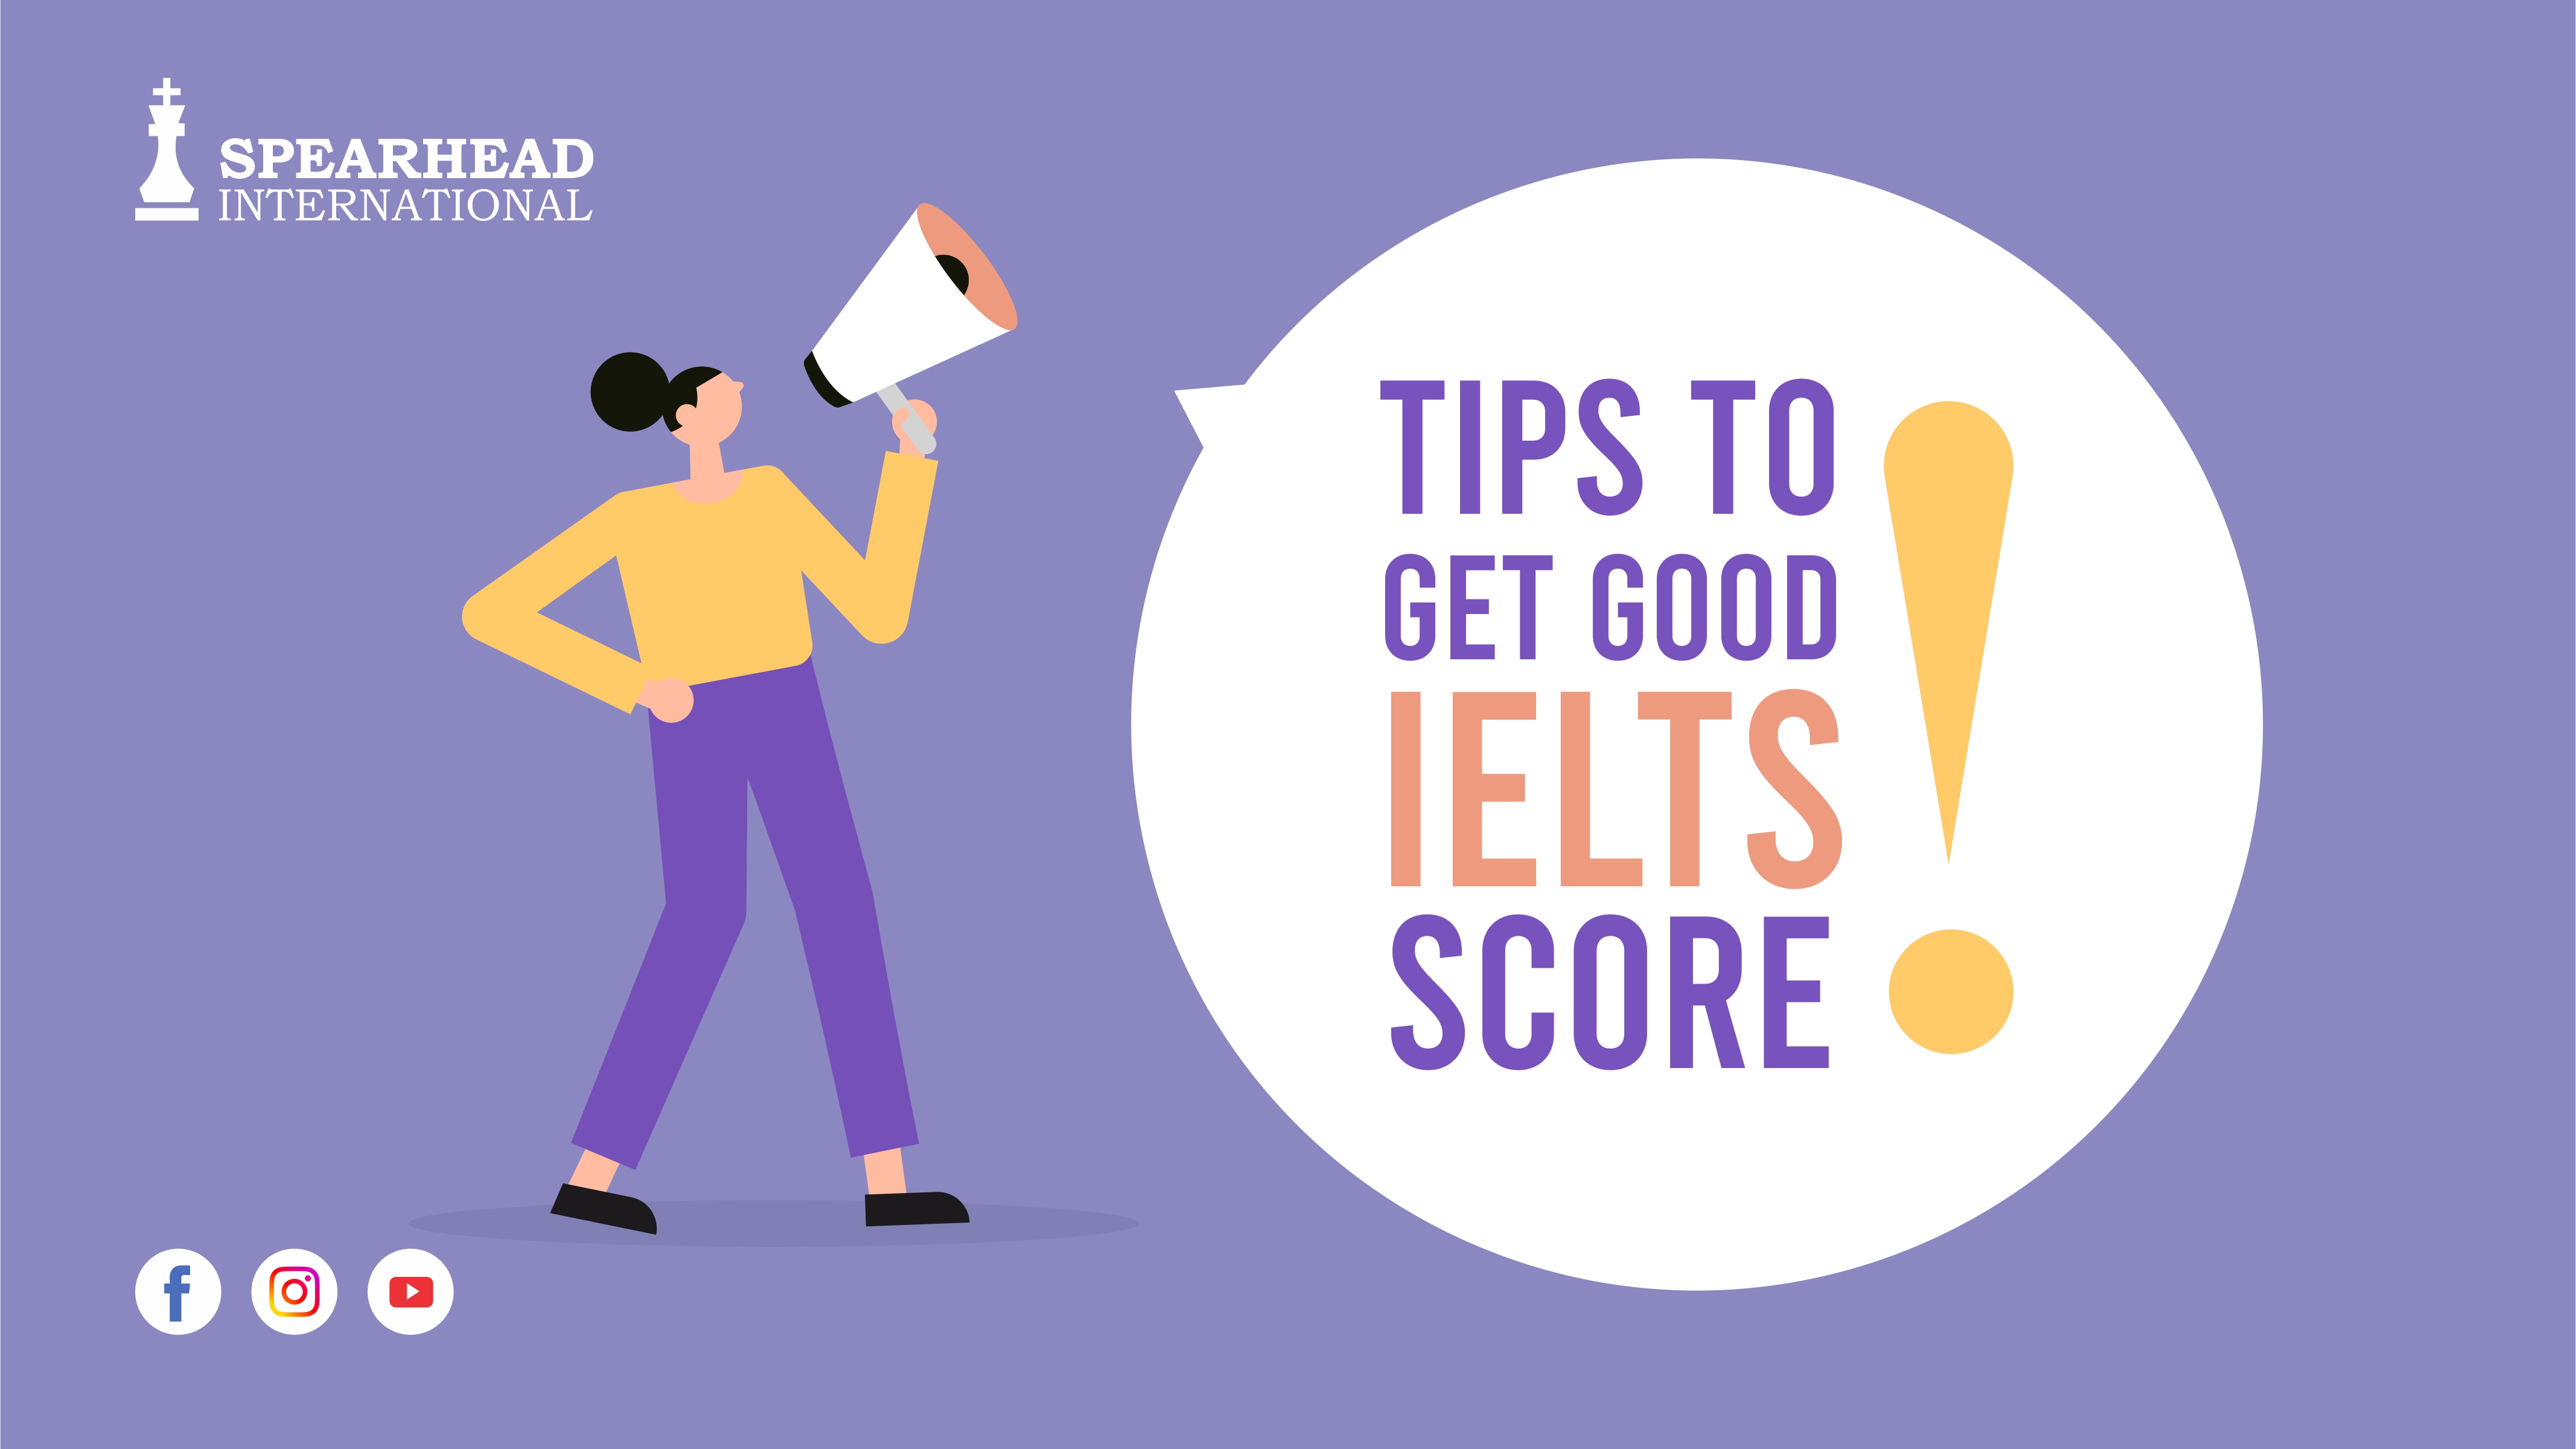 Tips‌ ‌and‌ ‌Tricks‌ ‌to‌ ‌get‌ ‌a‌ ‌good‌ ‌IELTS‌ ‌score‌ ‌